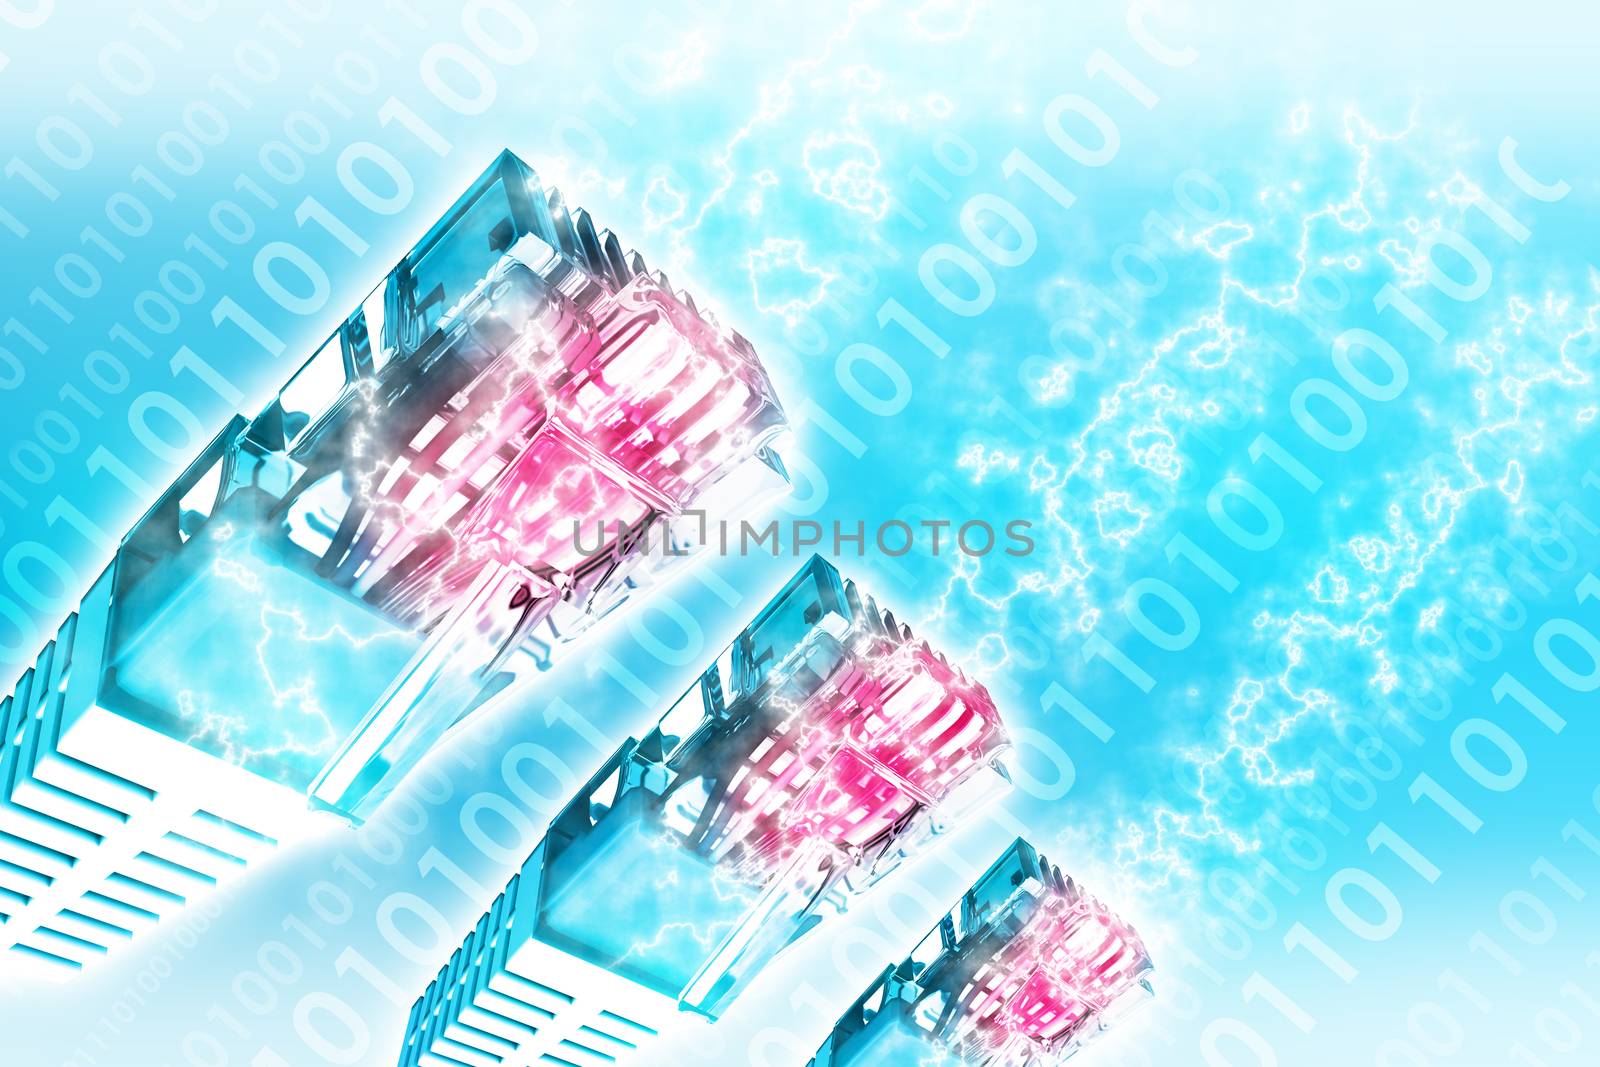 Set of colorful computer cables on abstract bright background